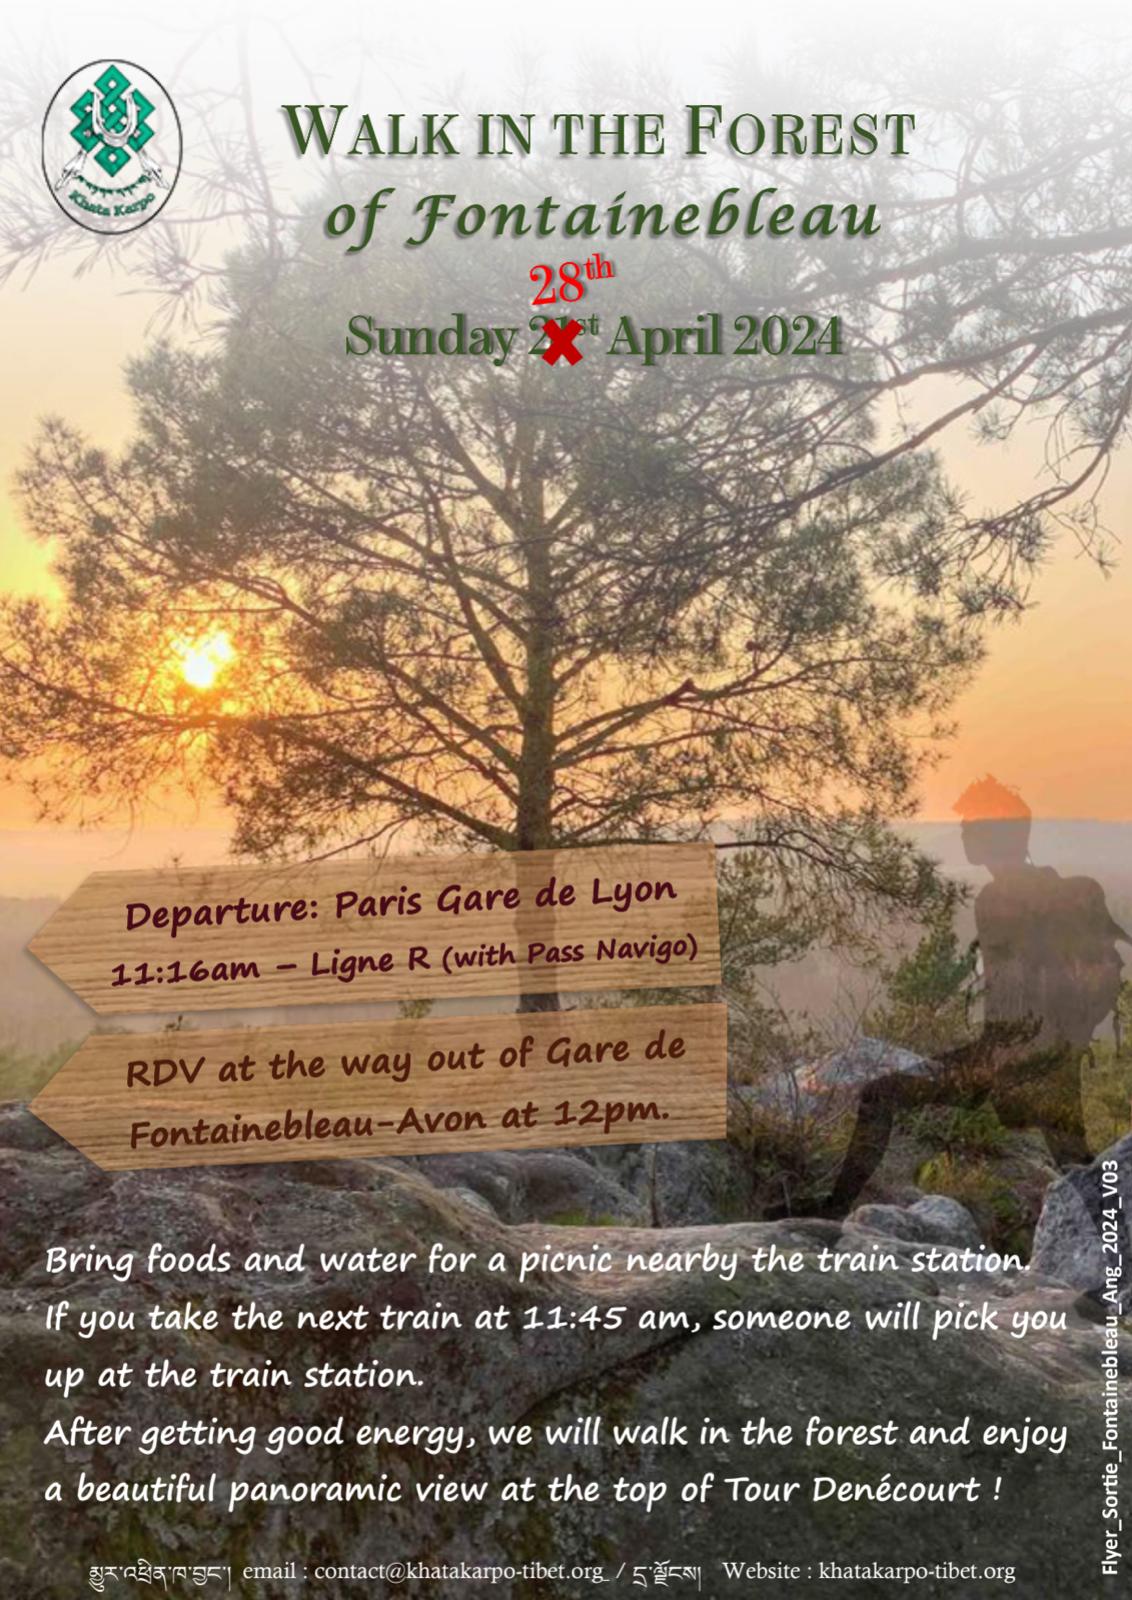 28th of april - Walk in the forest of Fontainebleau